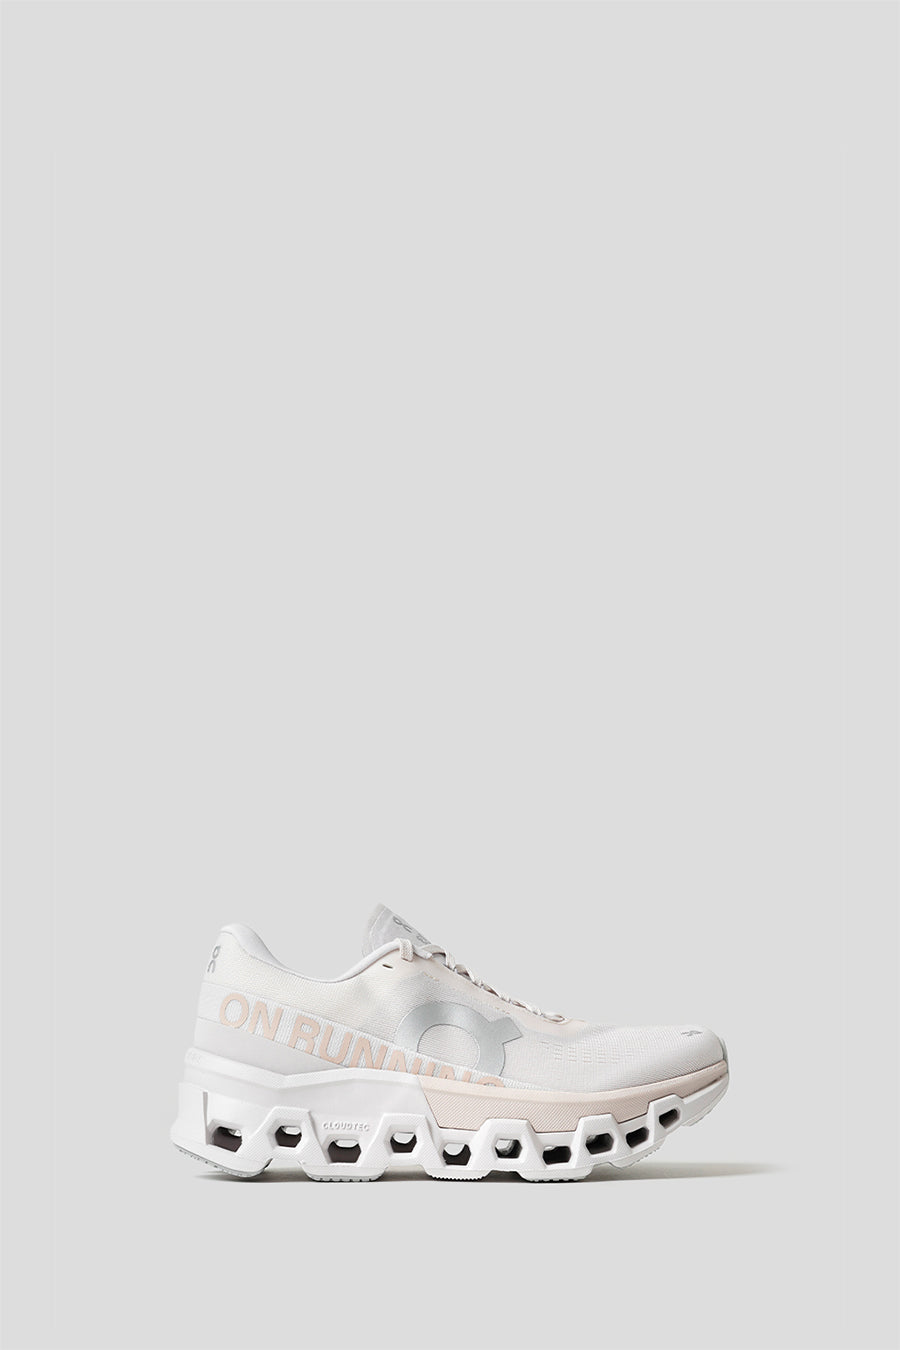 ON RUNNING - SNEAKERS W CLOUDMONSTER 2 SAND ET FROST - LE LABO STORE